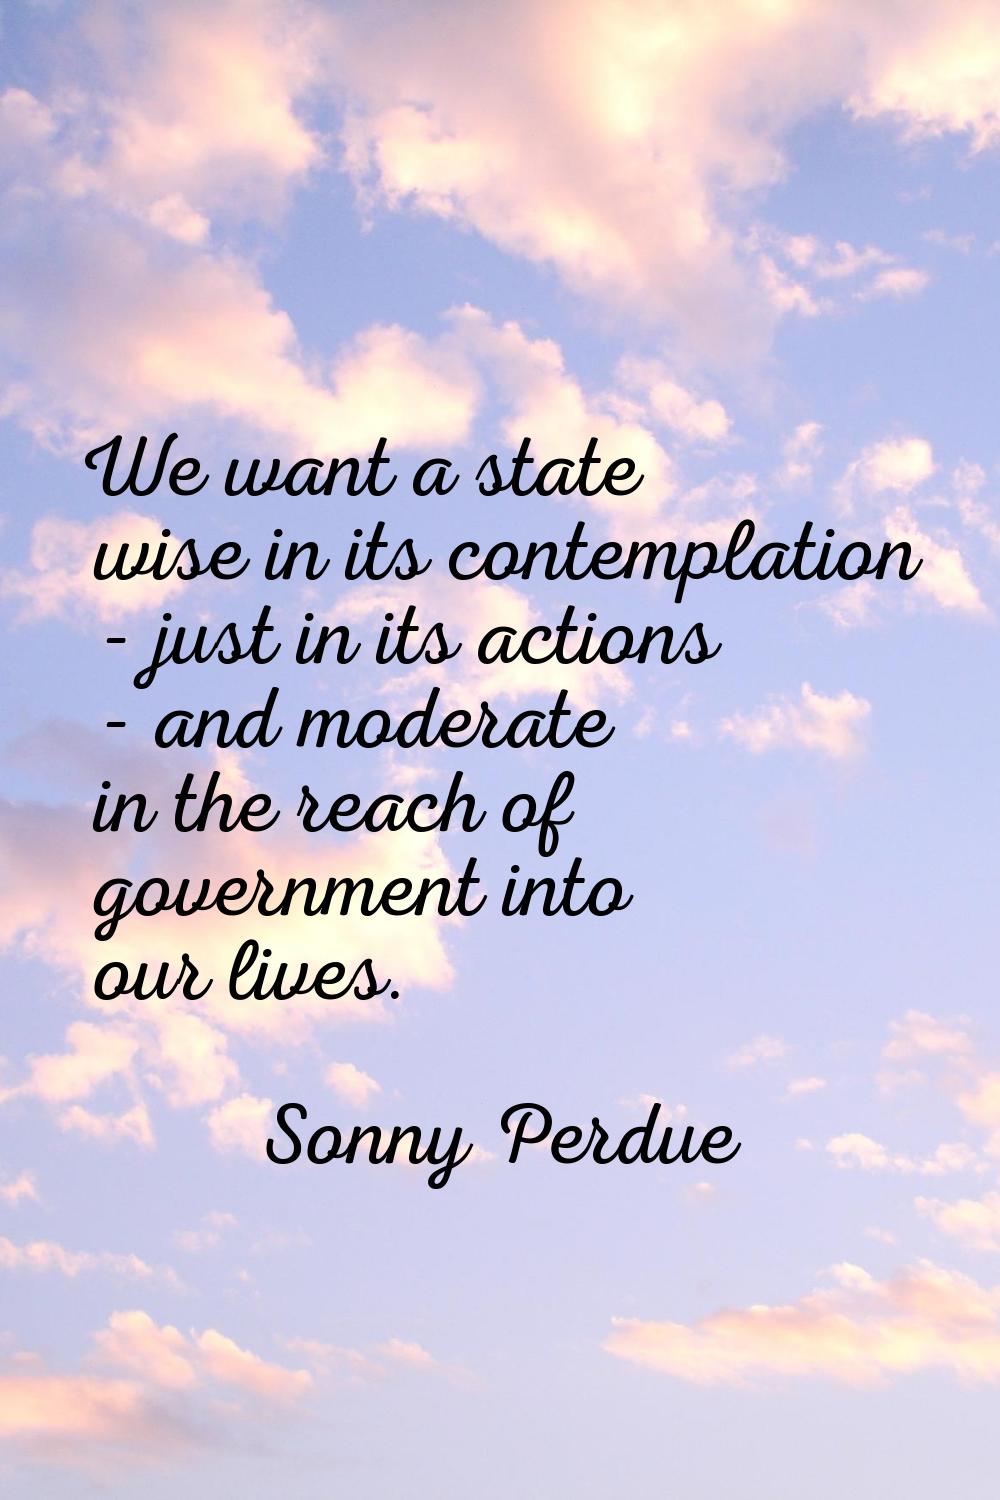 We want a state wise in its contemplation - just in its actions - and moderate in the reach of gove